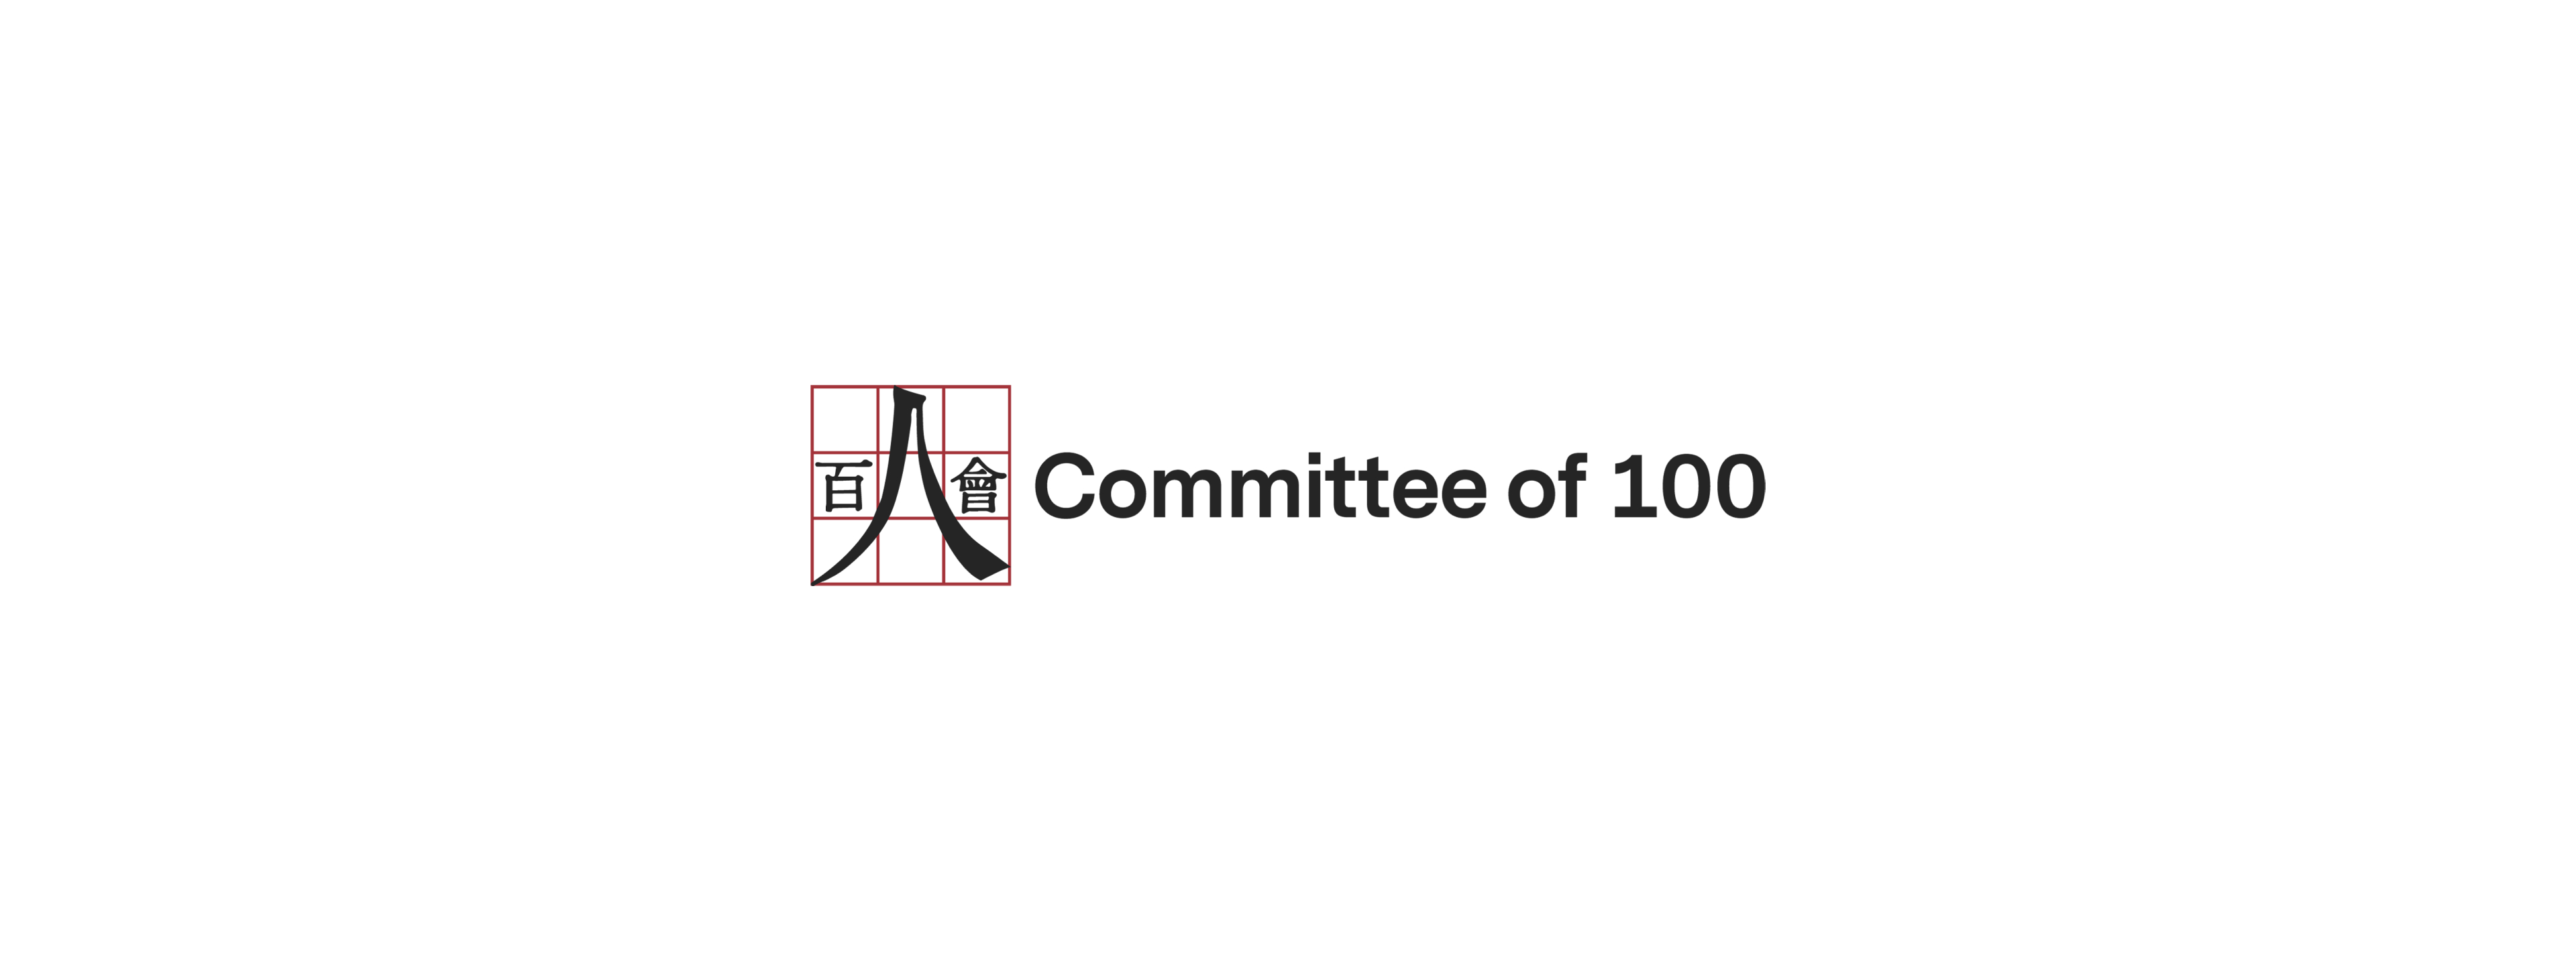 Committee of 100’s letter to Chairman Sanders, Ranking Member Cassidy, and Members of the Senate Committee on Health, Education, Labor &amp; Pensions recommending Julie Su to serve as the next U.S. Secretary of the Department of Labor.